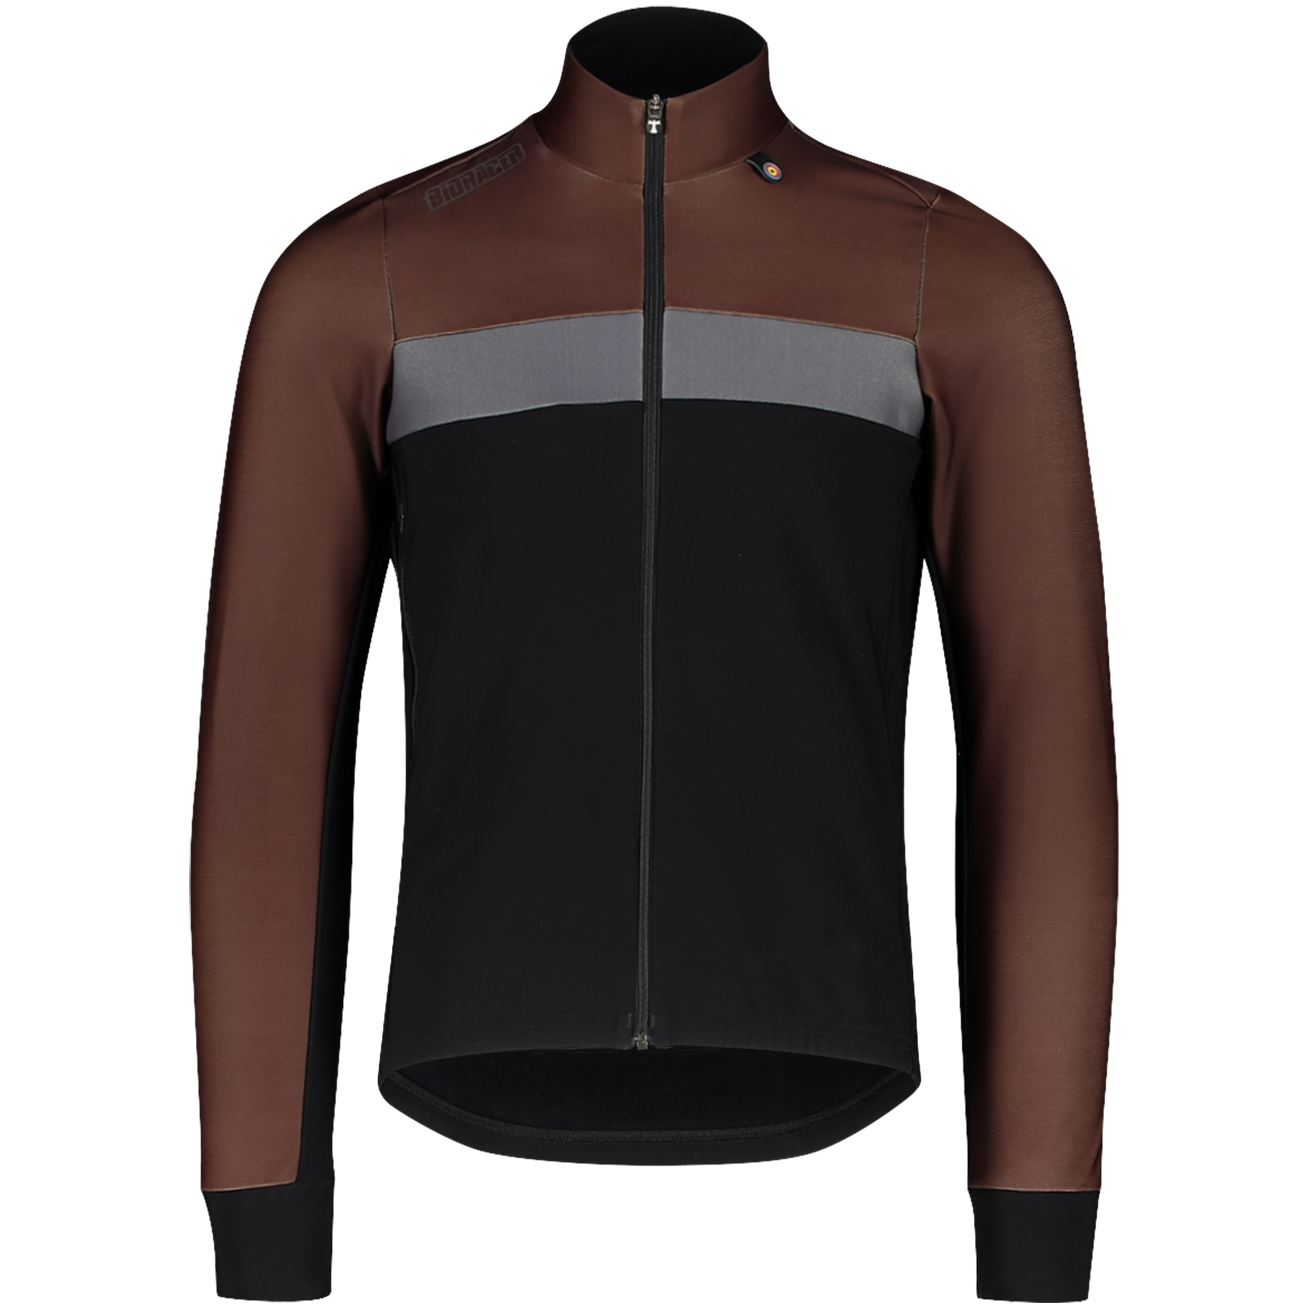 Picture of Bioracer Spitfire Tempest Thermal Long Sleeve Jersey Men - dark chocolate